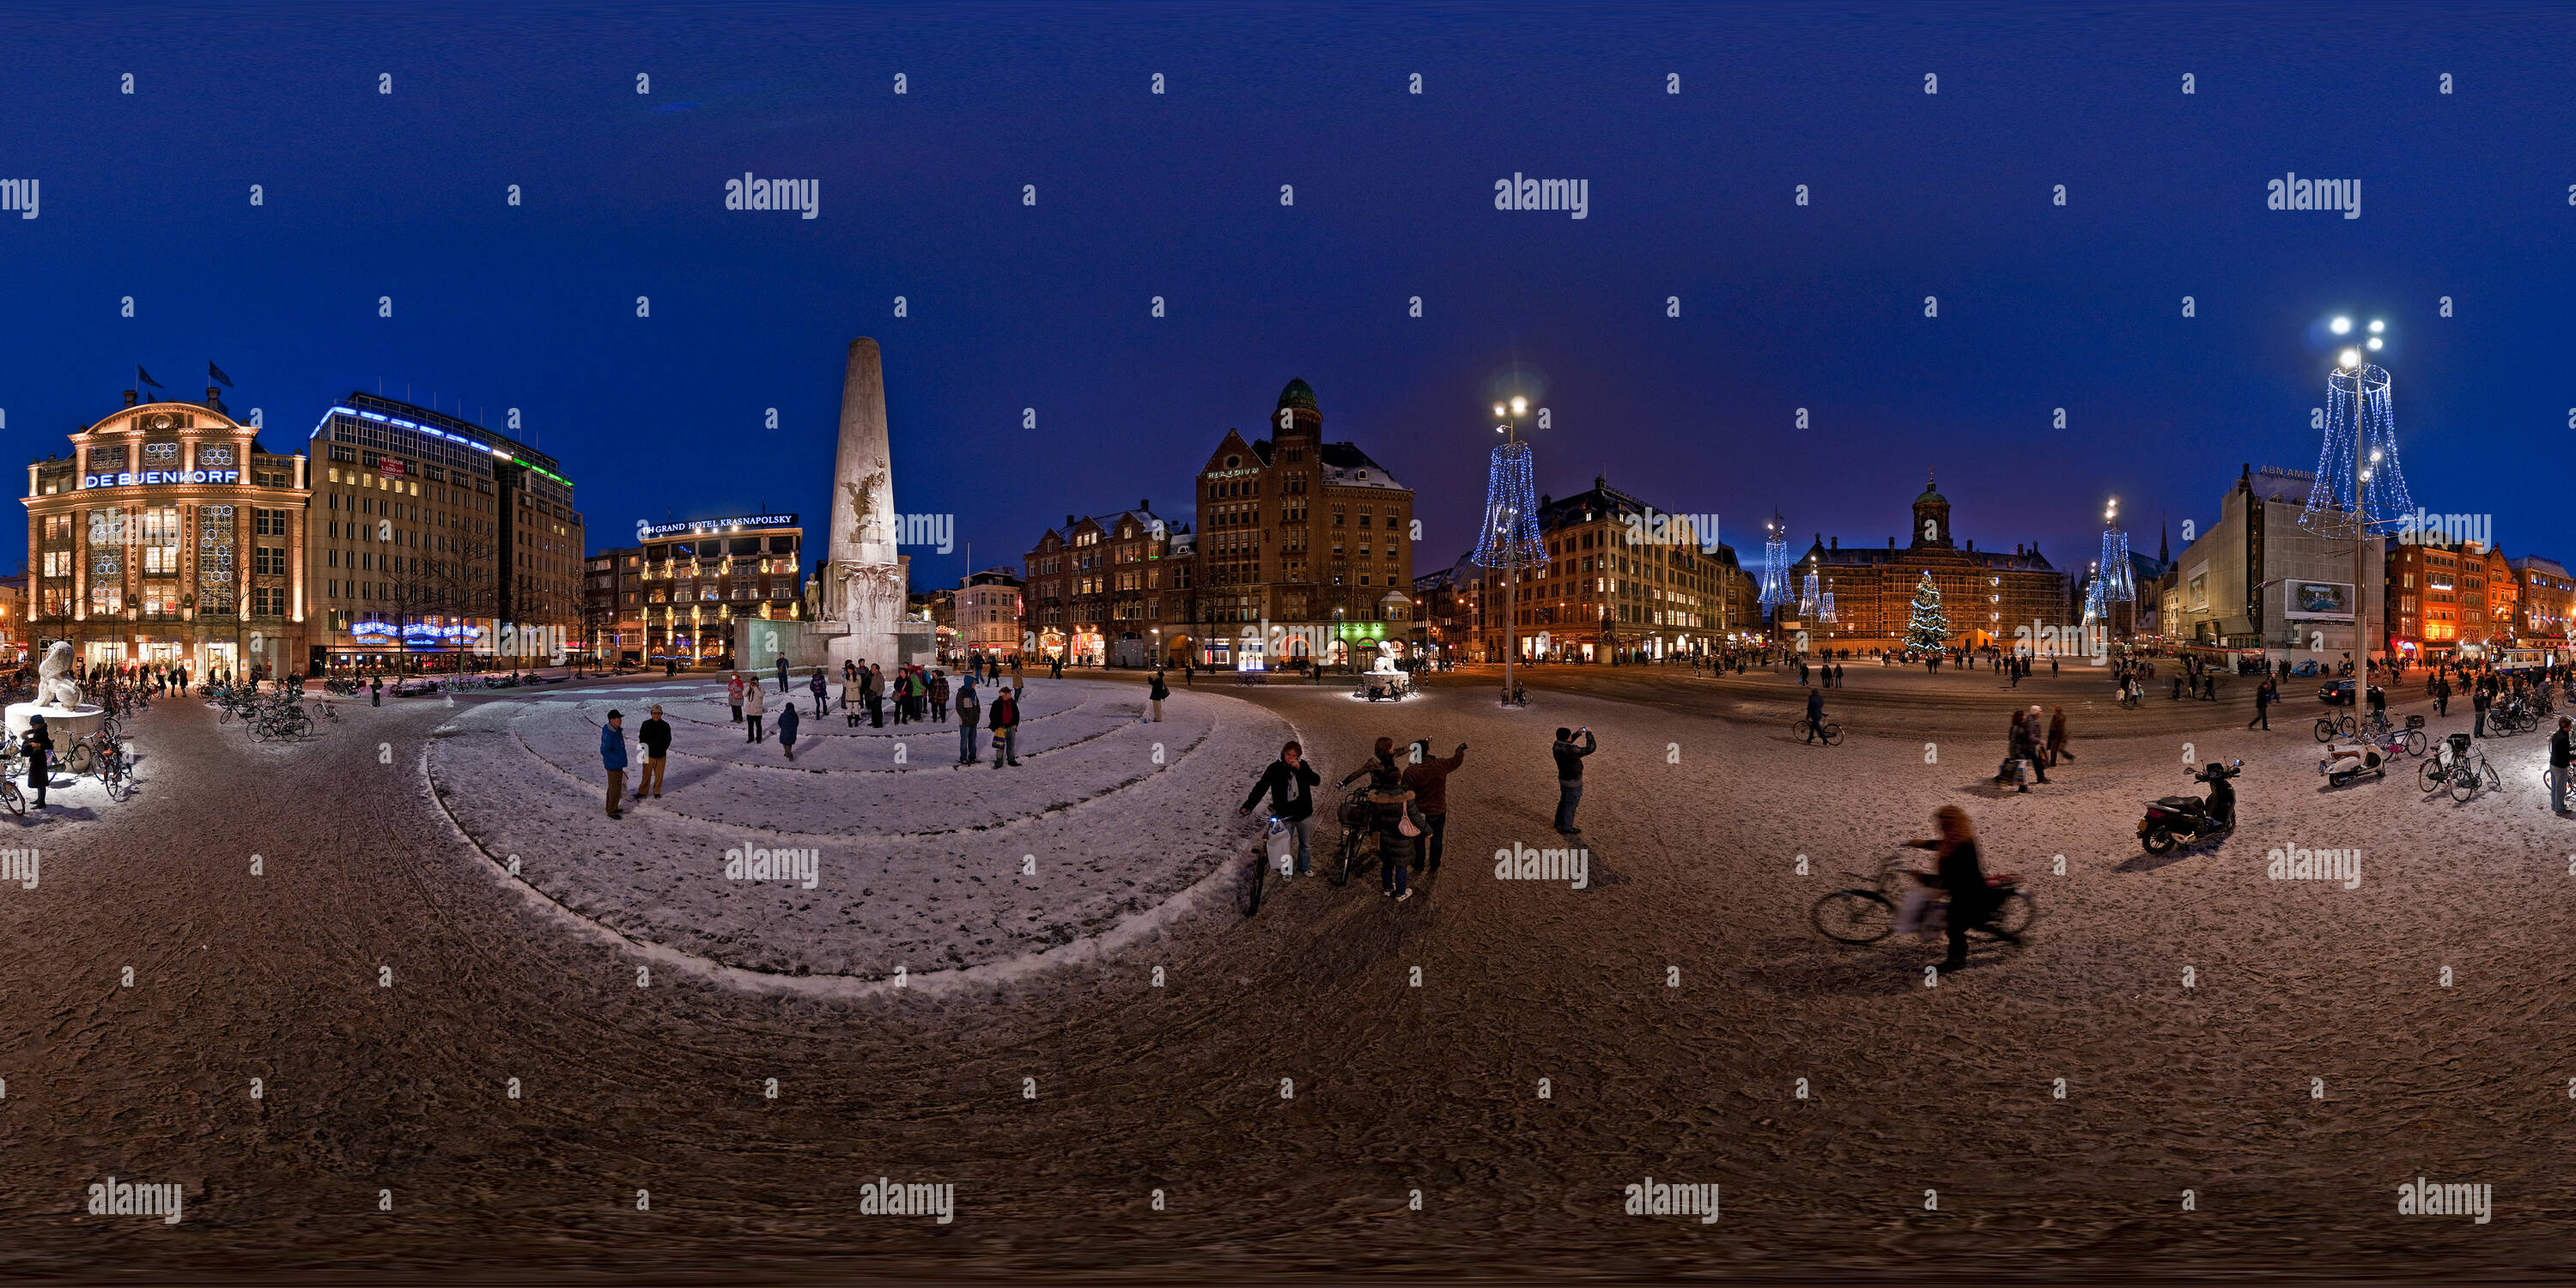 360 degree panoramic view of Dam Square, Amsterdam at Christmas time.